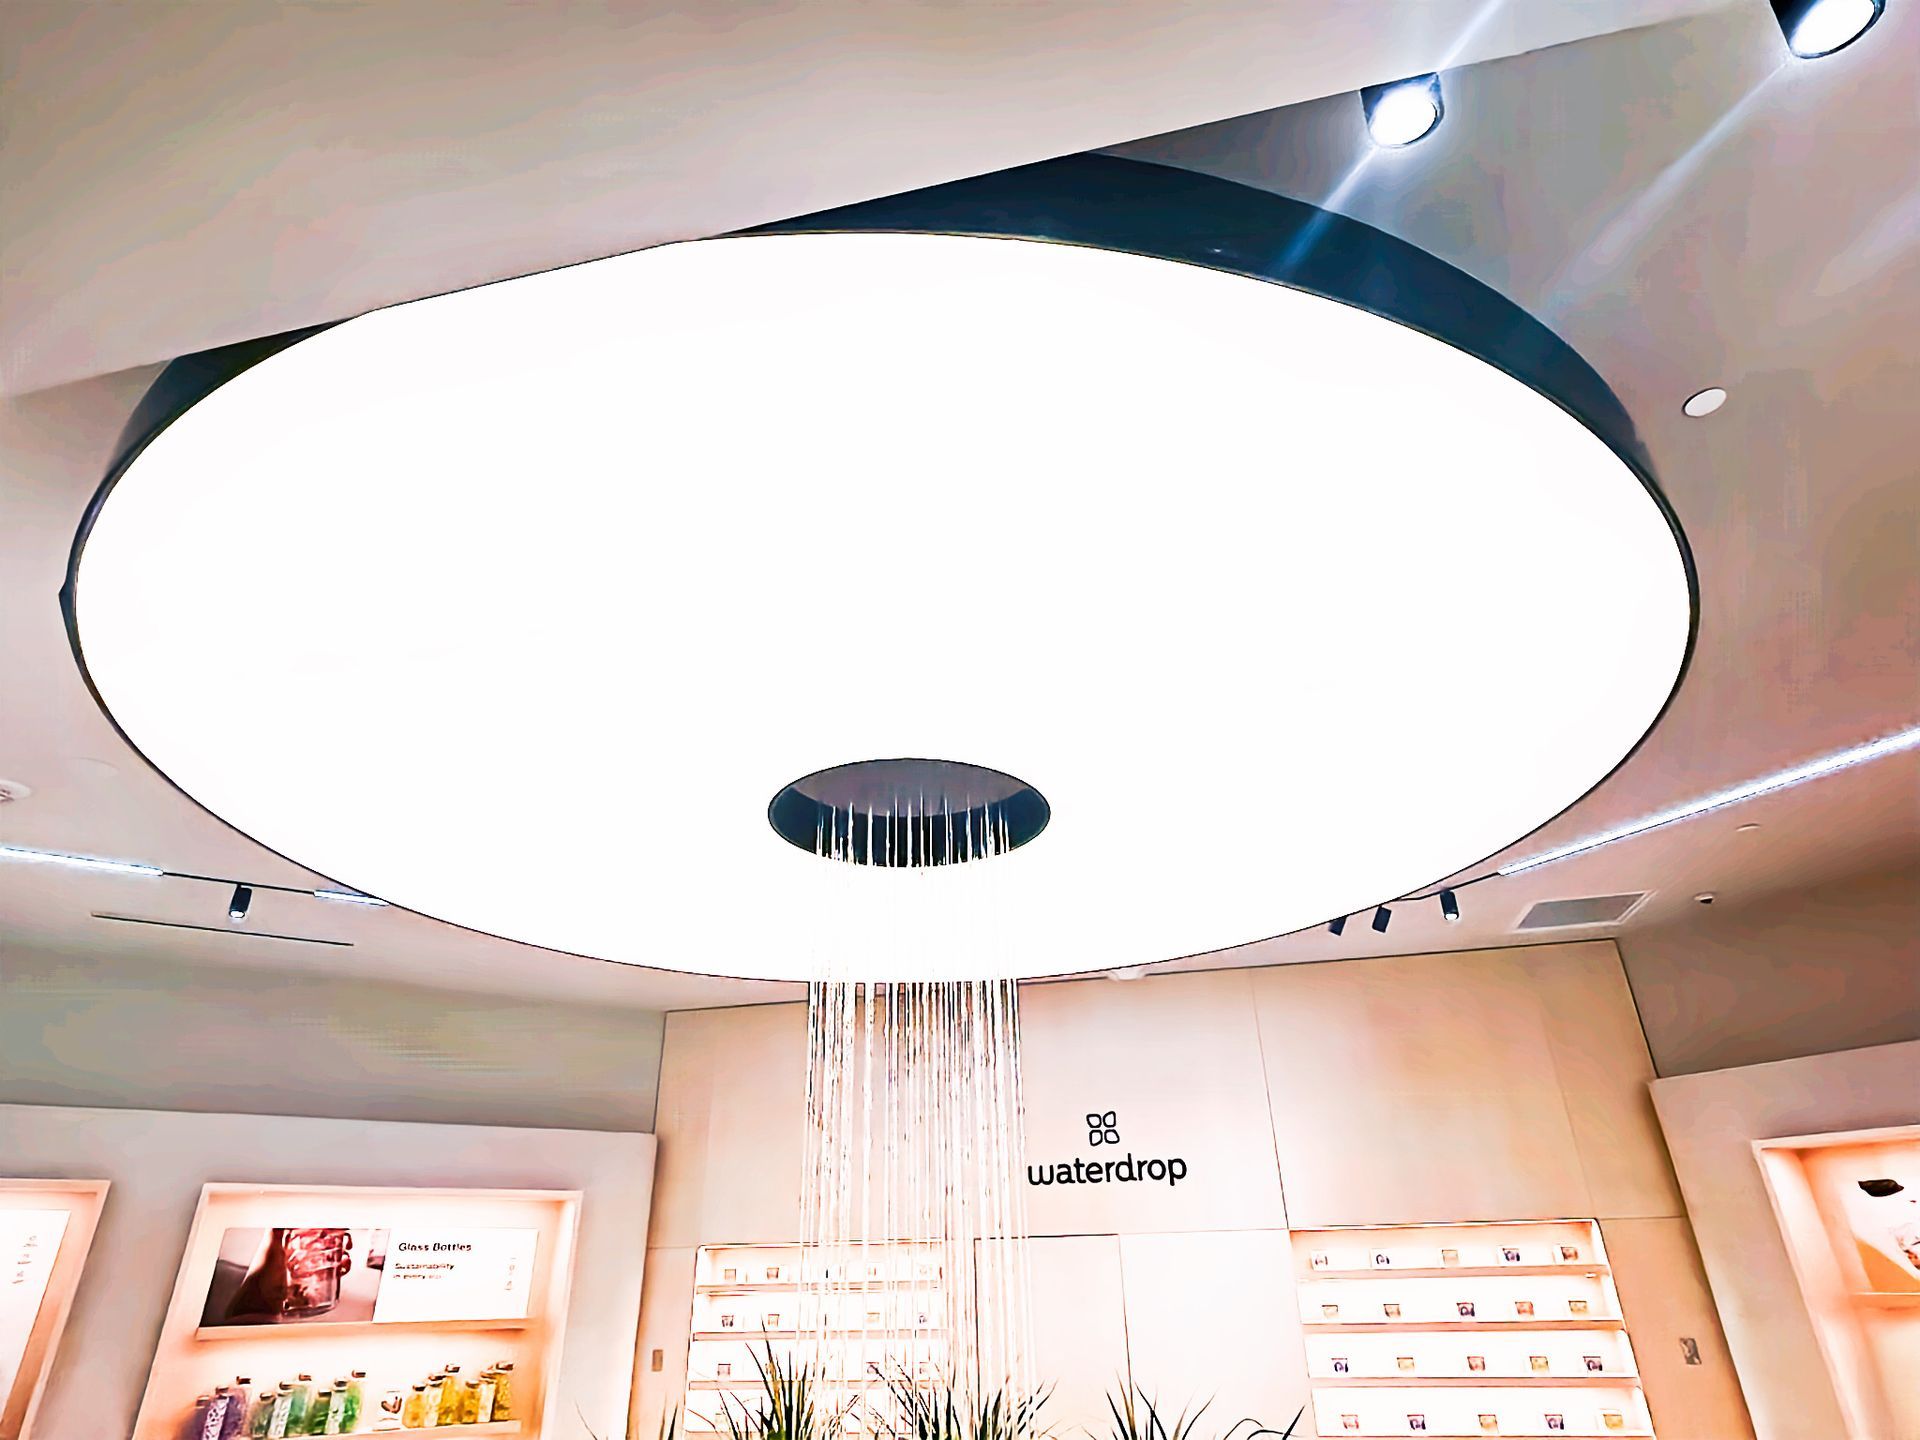 Unique Barrisol Translucent Ceiling Application for Waterdrop at Mall of America w l hall company